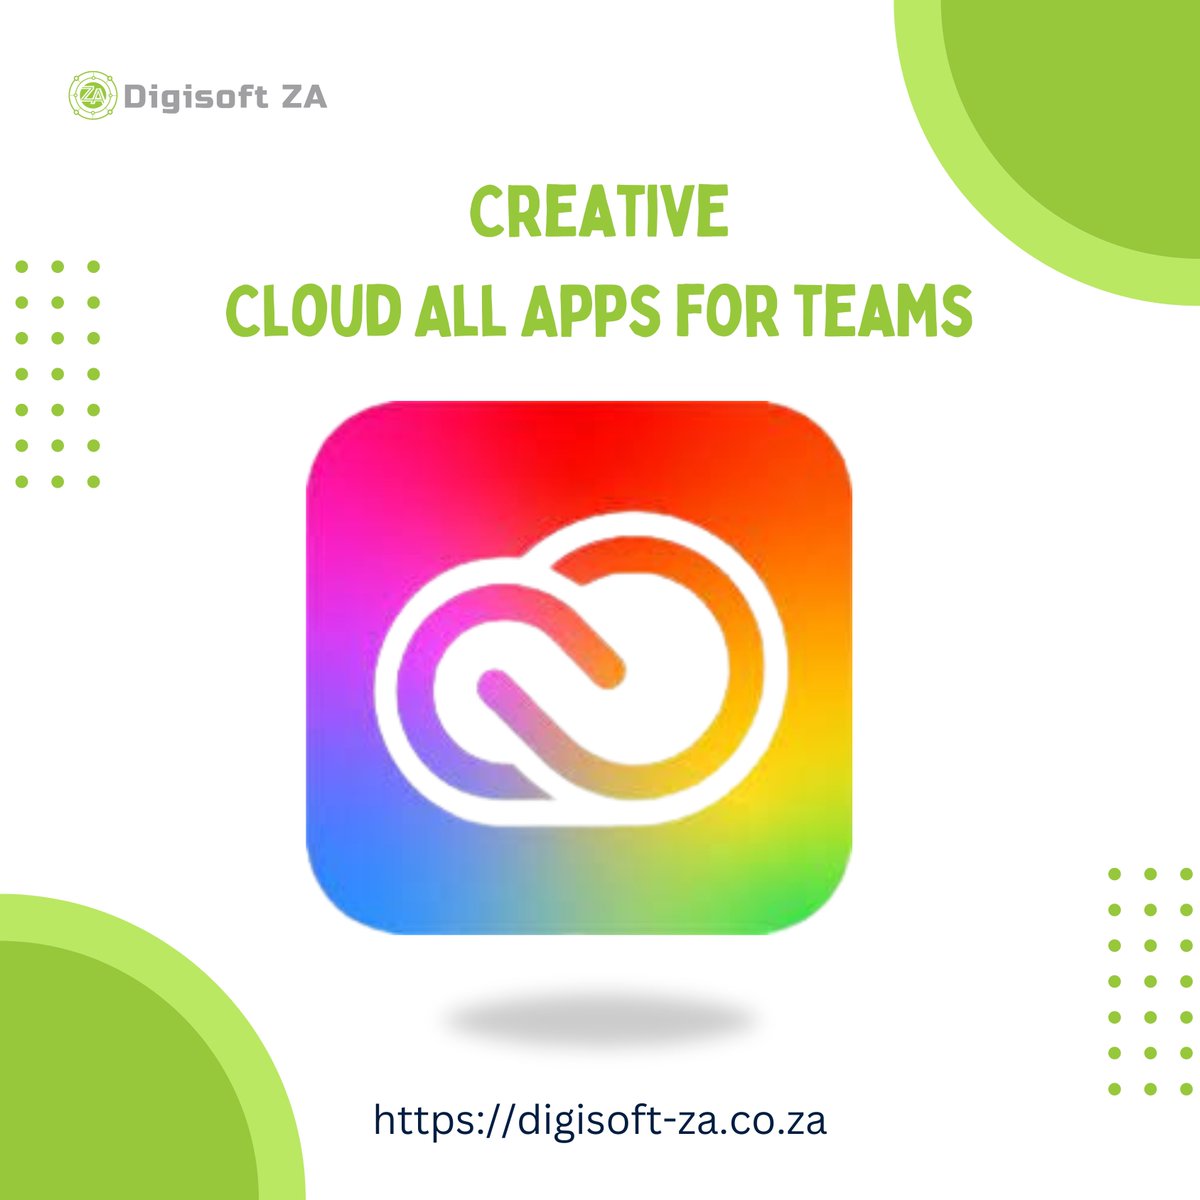 Creative Cloud | Entire Adobe app Collection Business Plan Subscription 

#CreativeCloud #AllApps #TeamEdition #DesignTeam #Collaboration #AdobeSuite #DigitalCreation #CreativeTeam #Teamwork #CreativeProcess #GraphicDesign #VideoEditing #WebDesign #Photography #Illustration